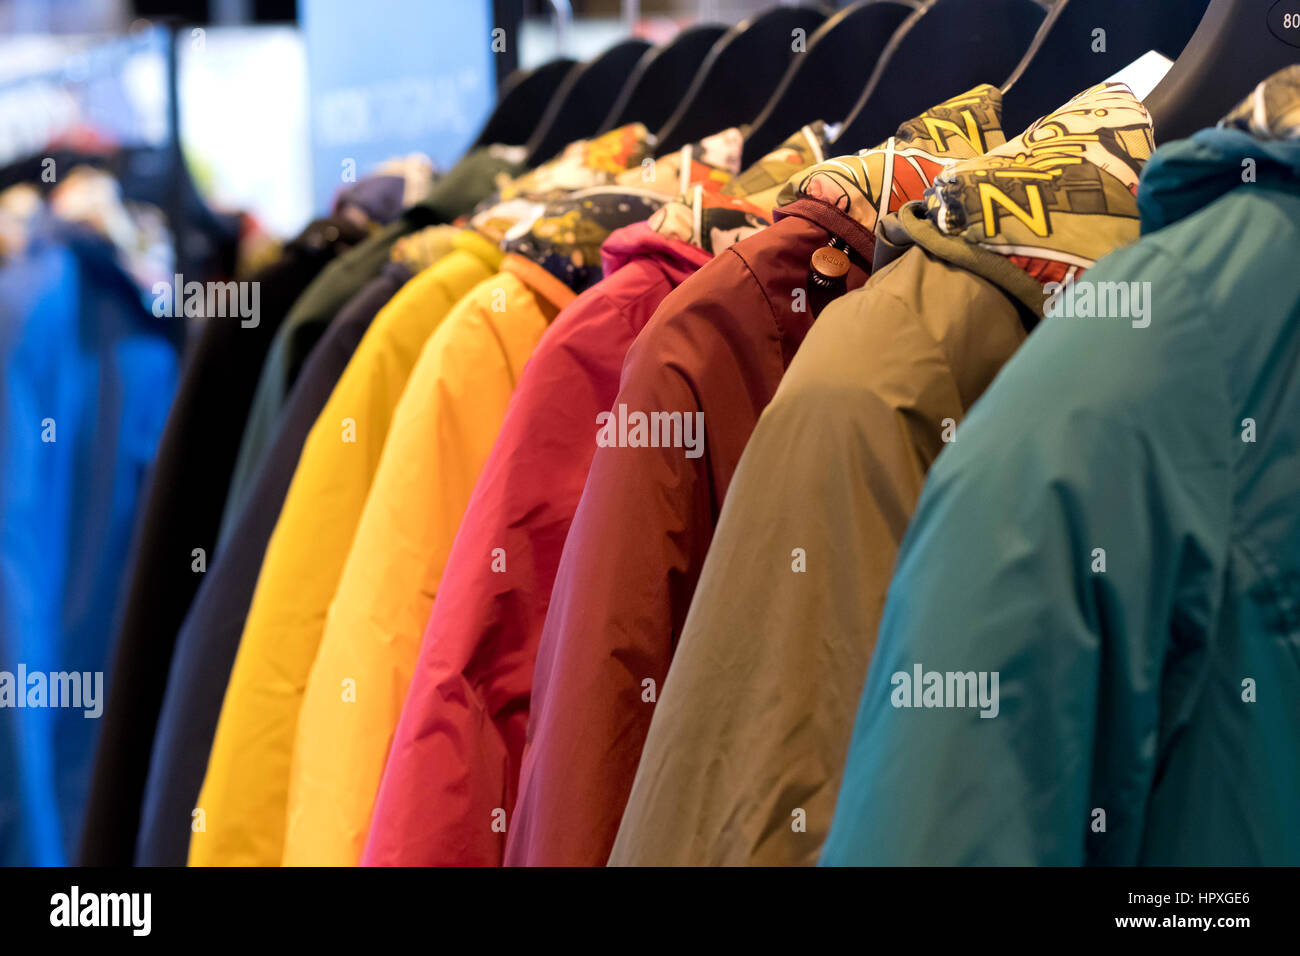 Colorful coats in perspective. MOMAD International fashion trade show IFEMA 2017 Madrid. Stock Photo